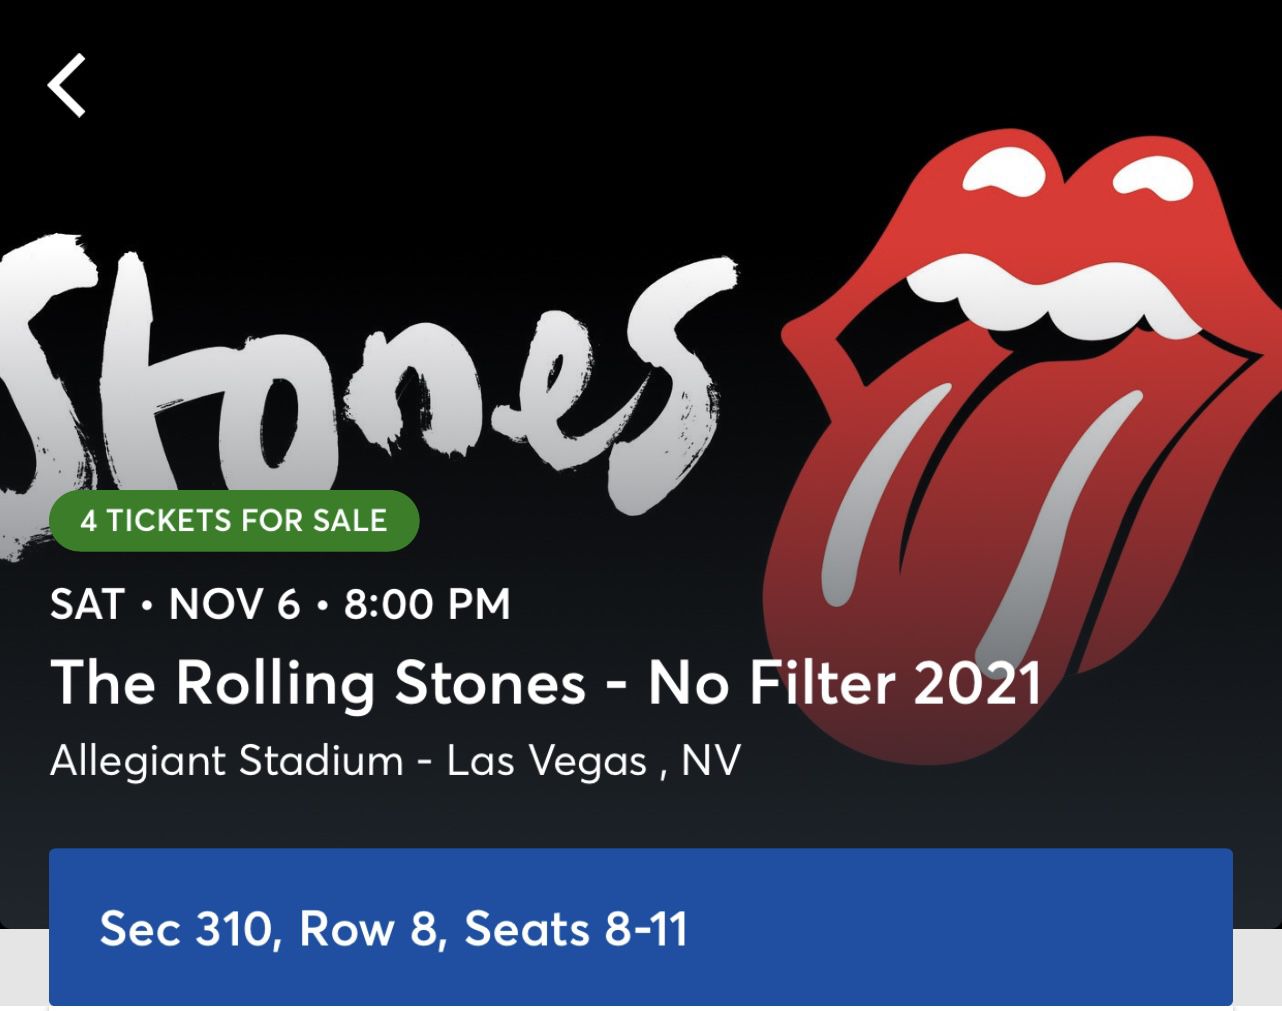  Music Rolling Stones Concert Low Price  !Deal  Vegas Section 310 Row 8